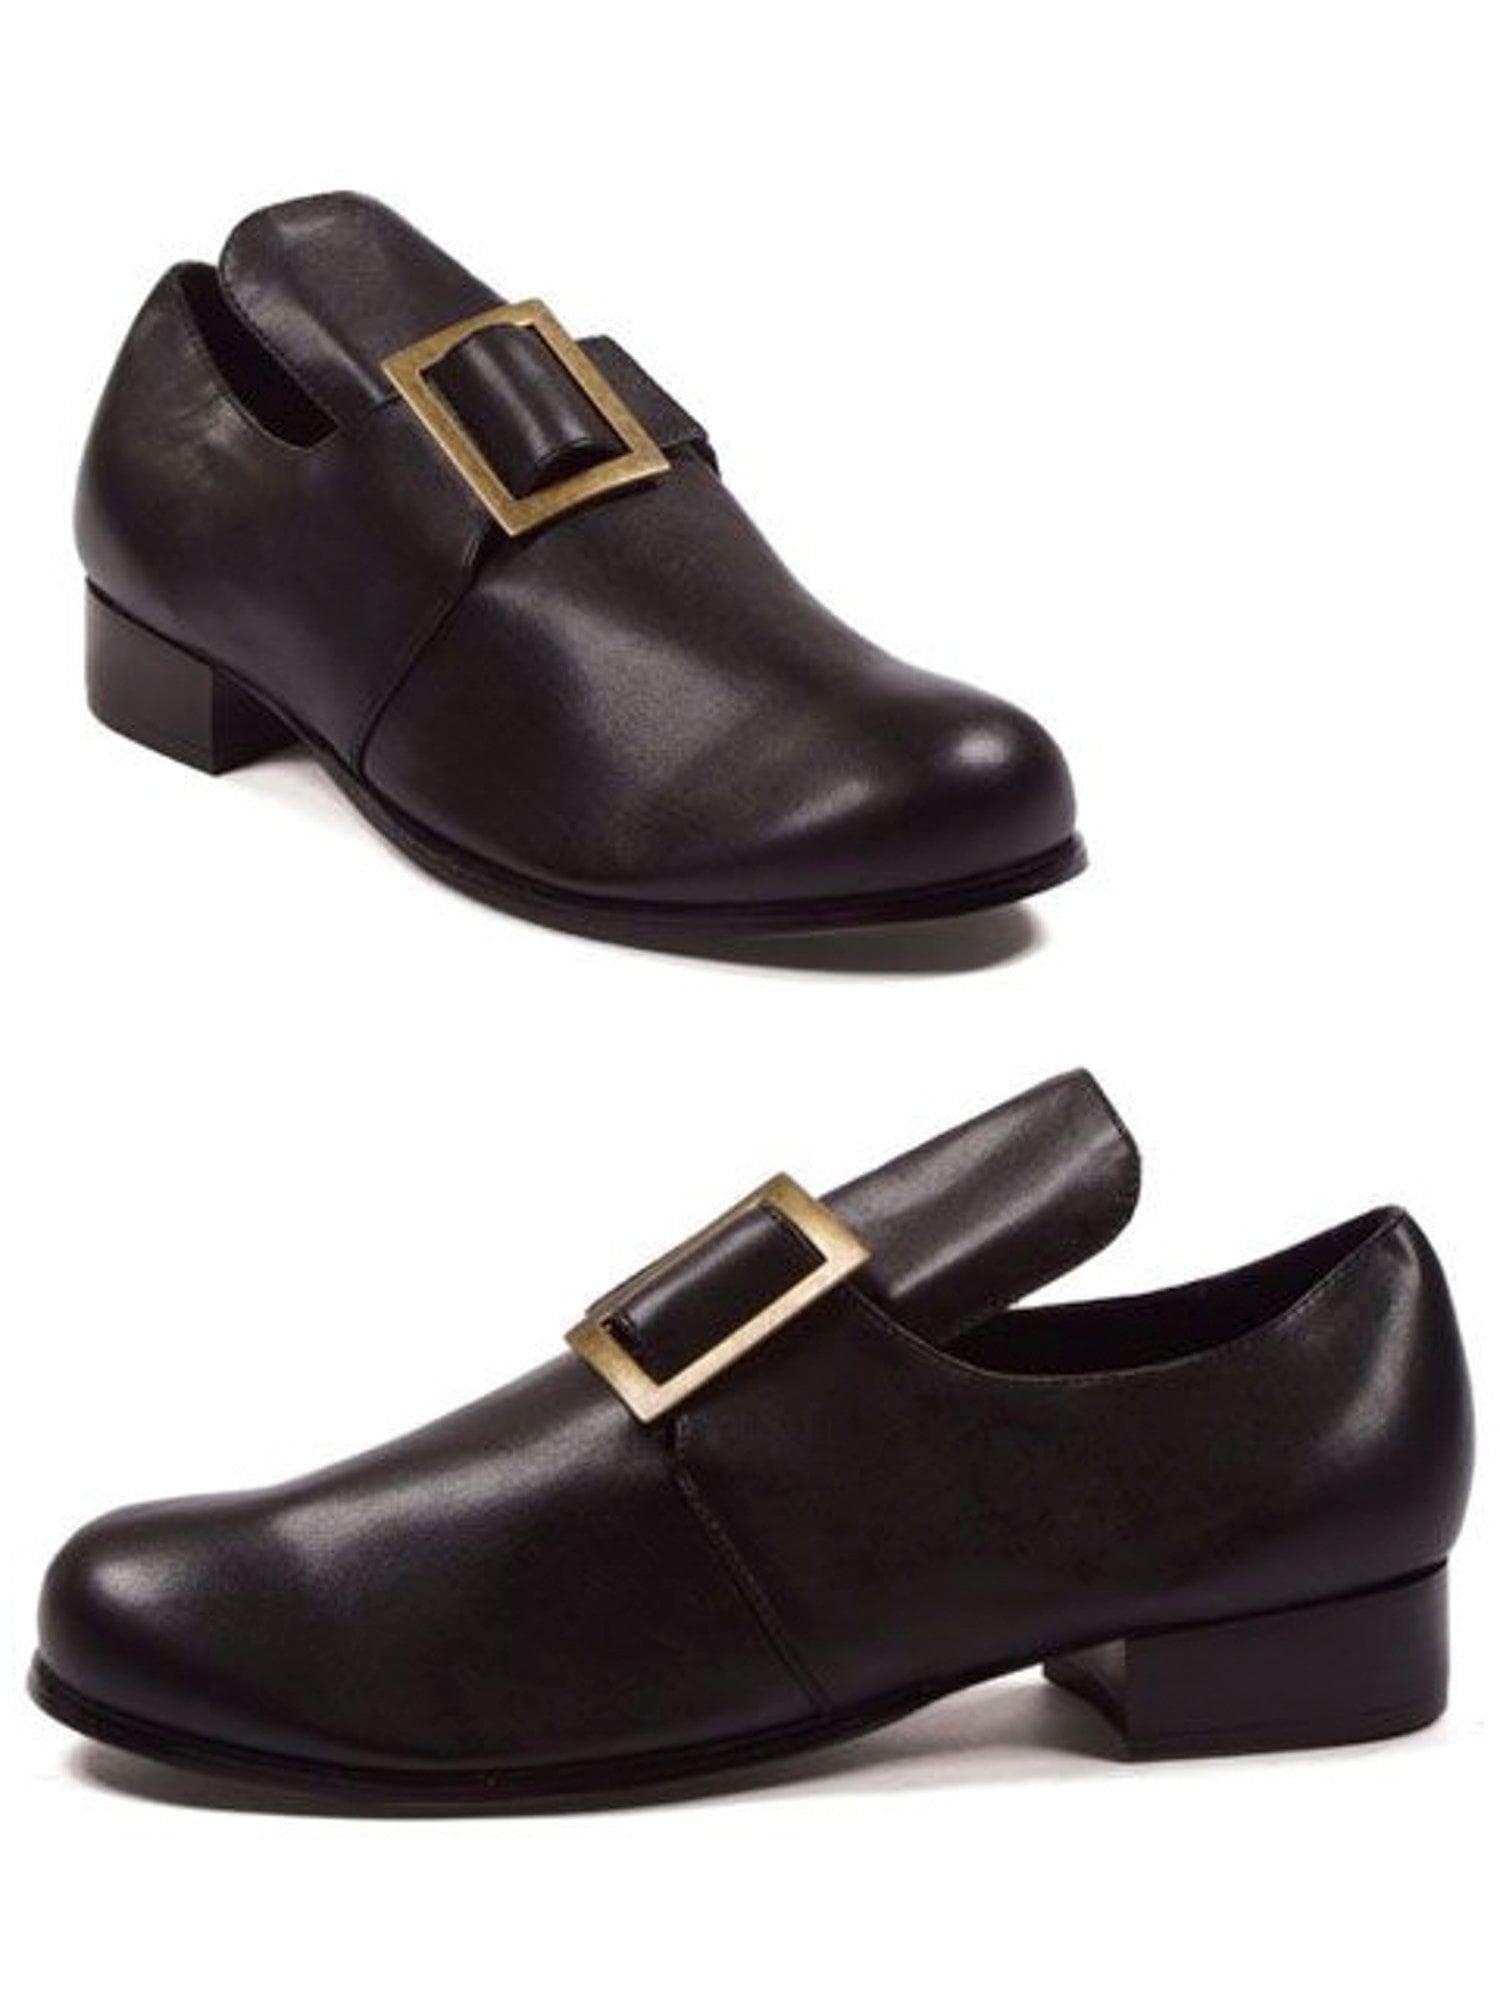 Adult Black Buckled Colonial Shoes - costumes.com